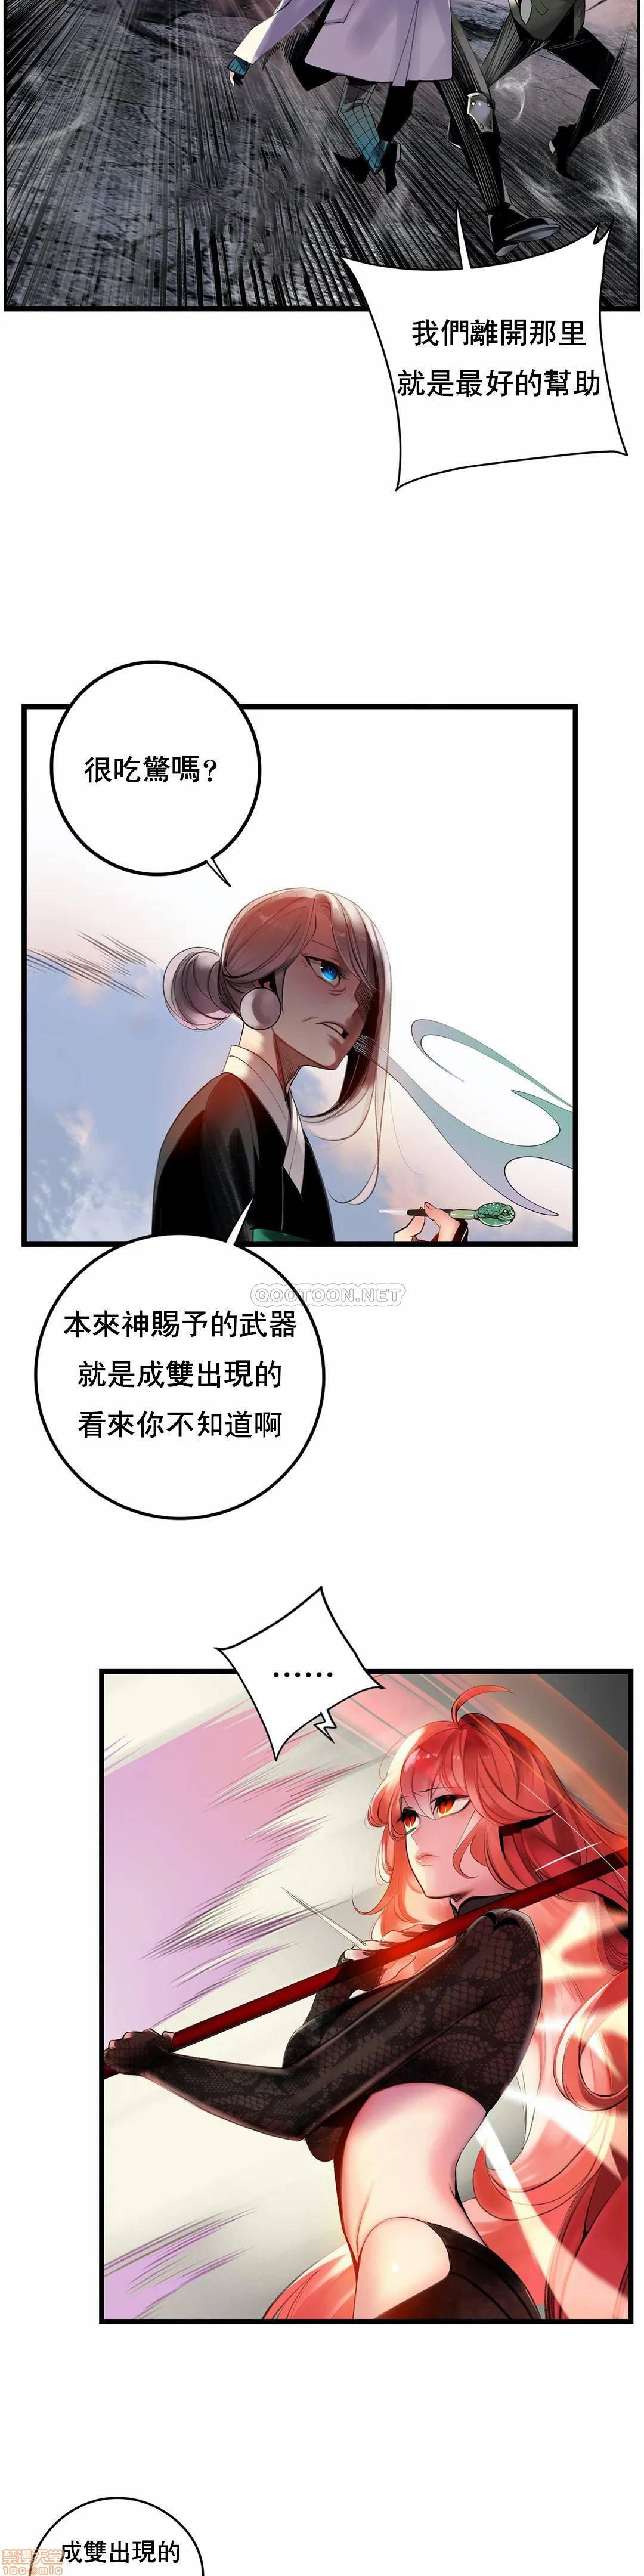 [Juder] Lilith`s Cord (第二季) Ch.77-93 end [Chinese] 258